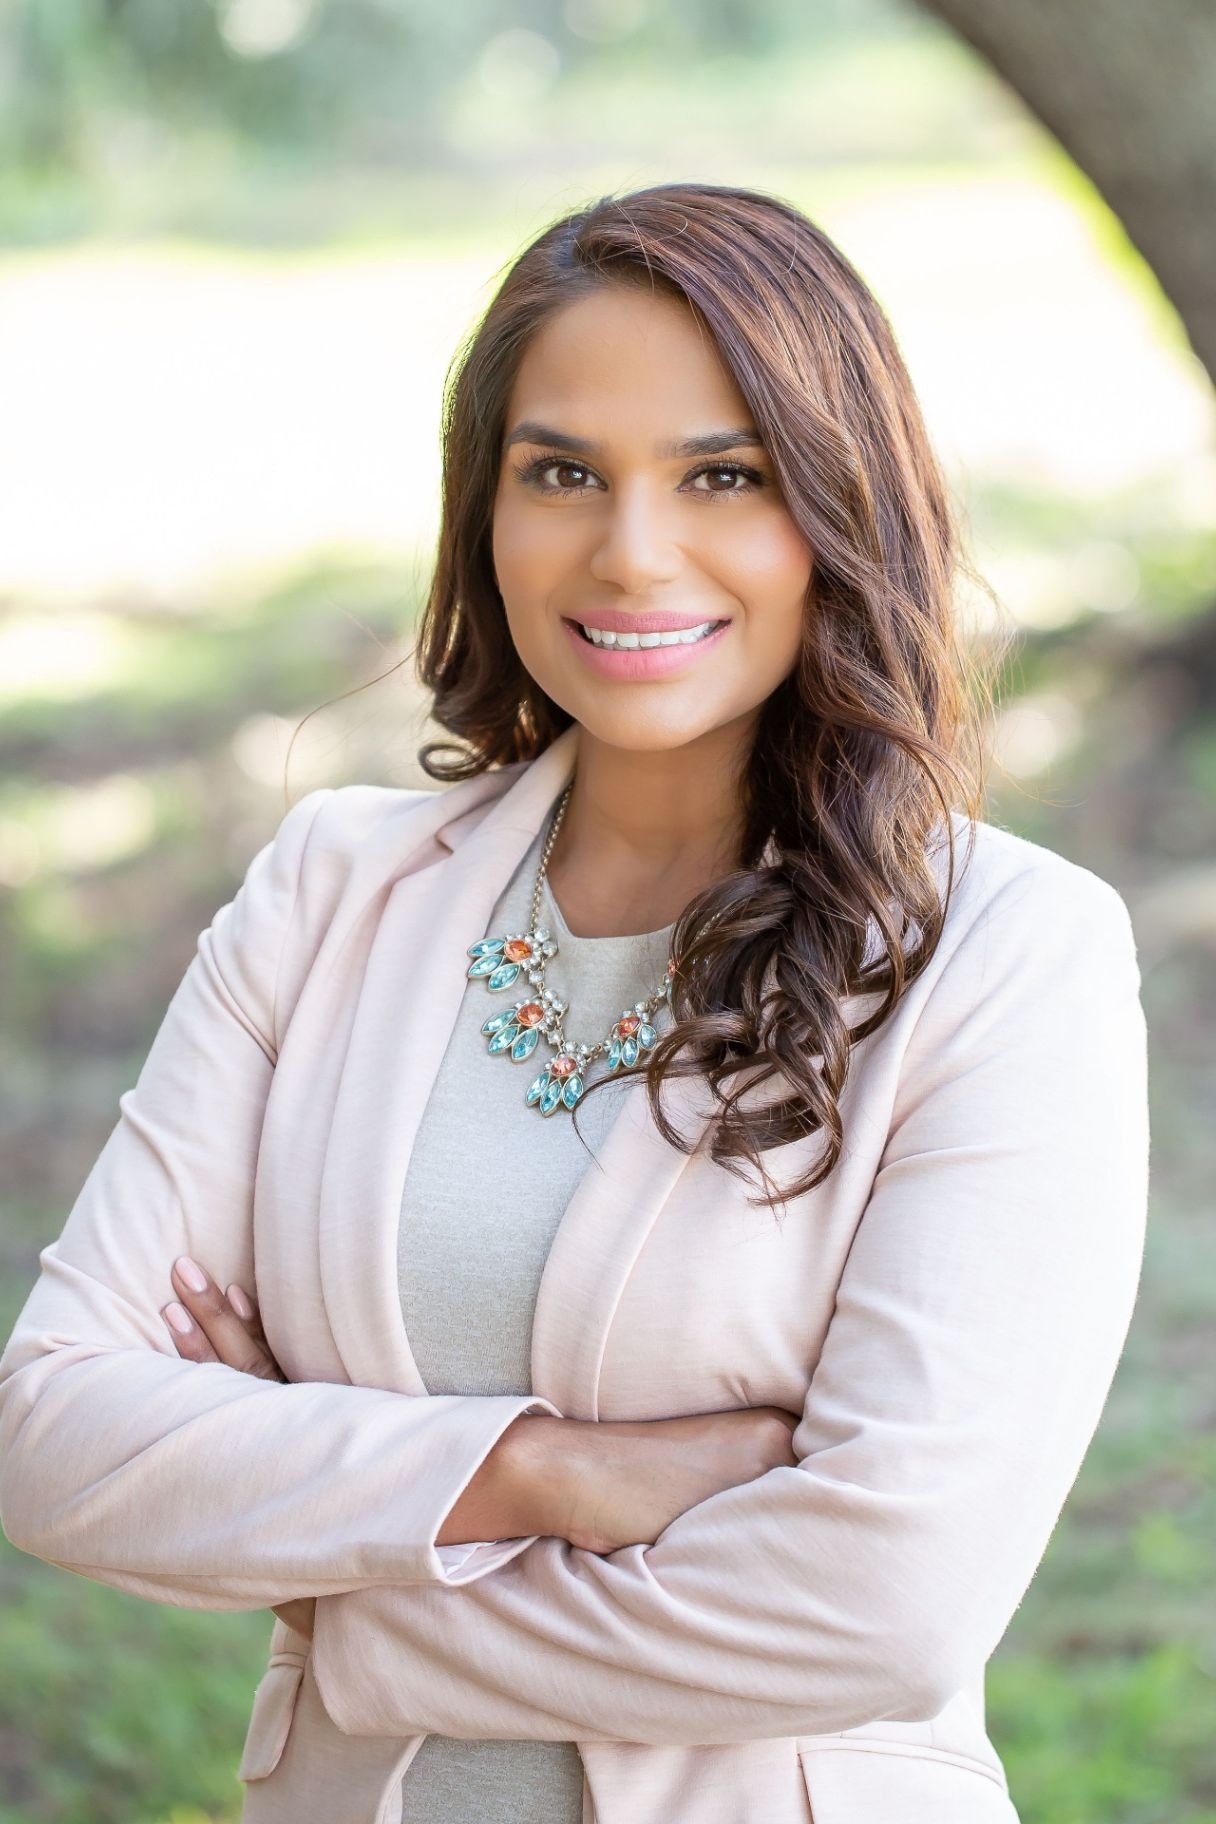 Image of Neuropsychologist Shivani Saible. Discover how a skilled neuropsychologist can help you uncover your unique challenges in adult neuropsychological testing in Saint Petersburg, FL.